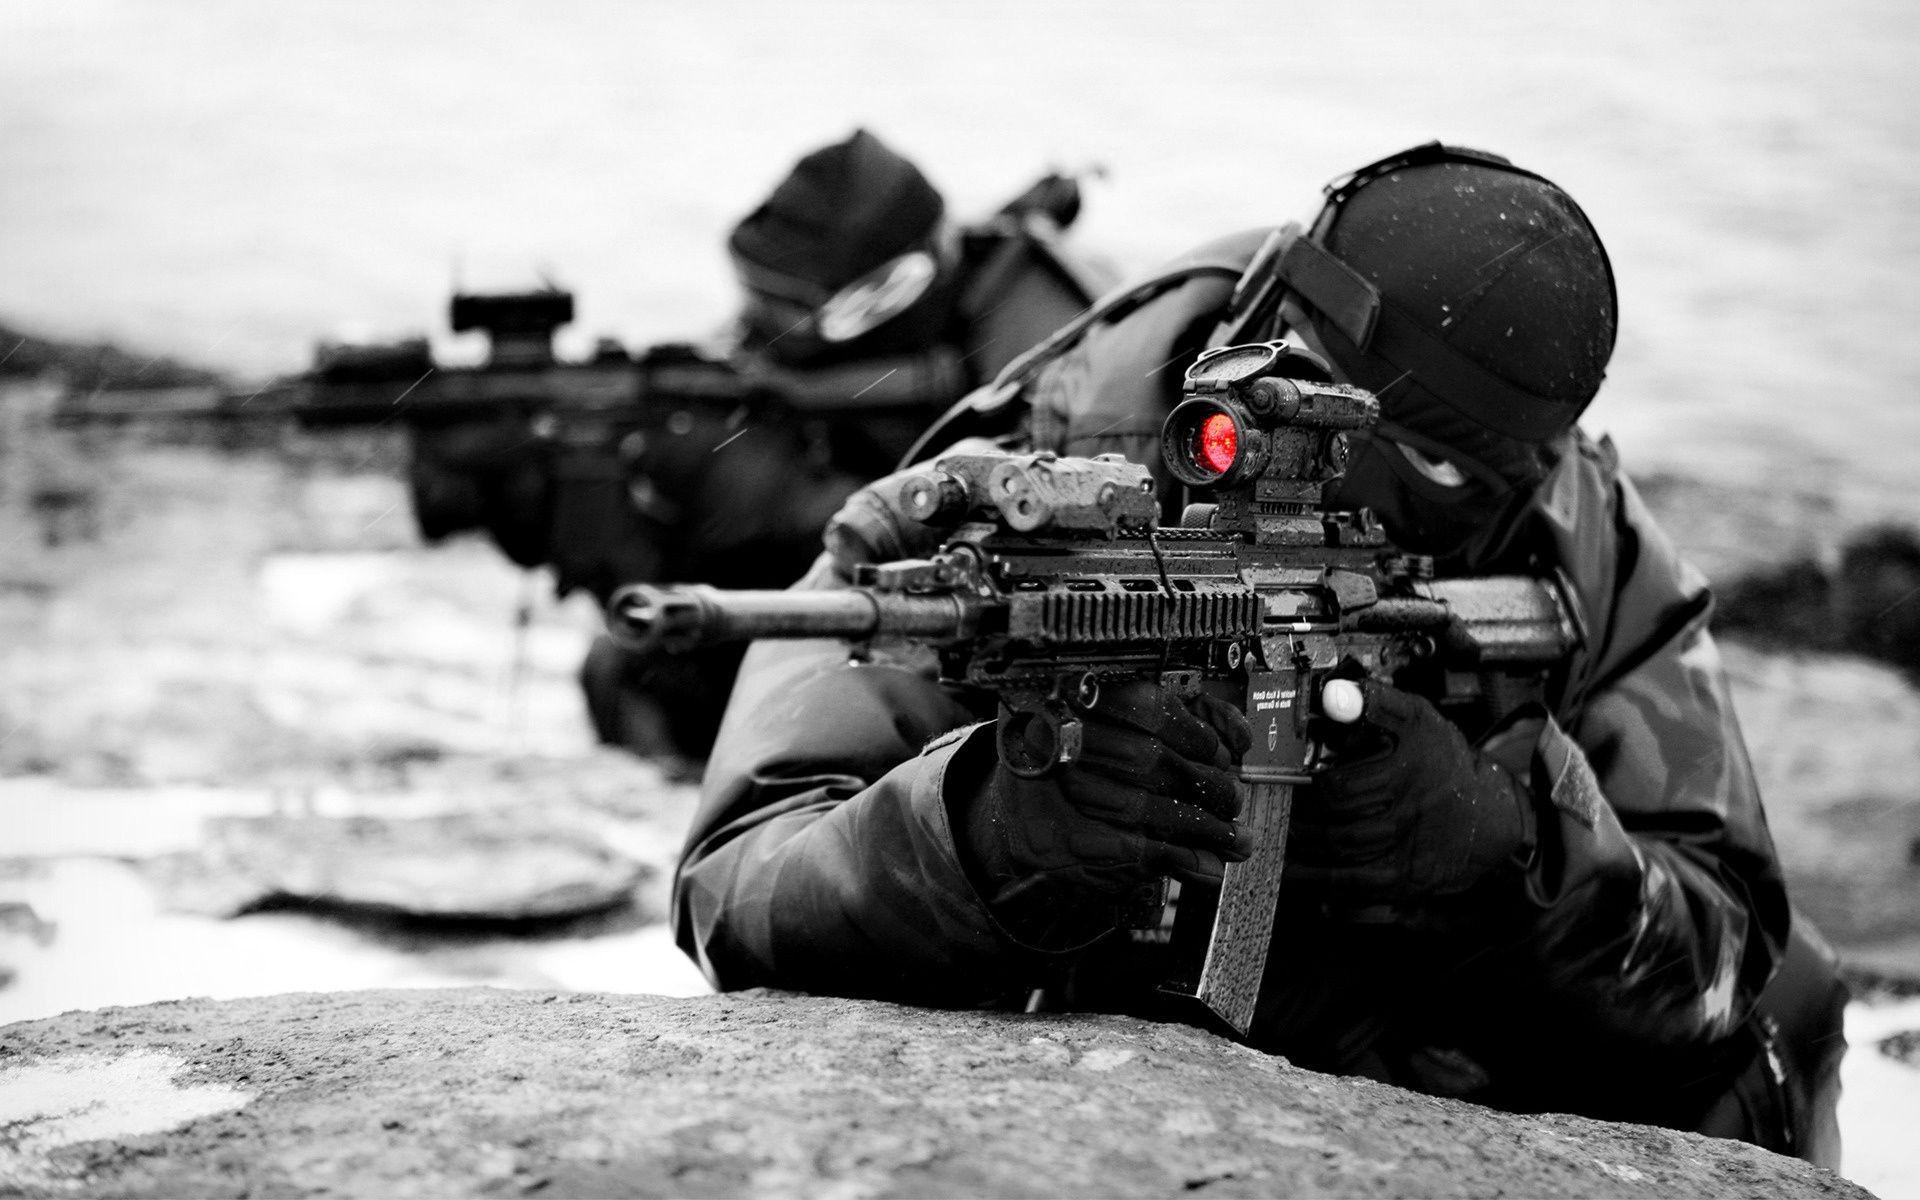 Soldiers military special forces weapons